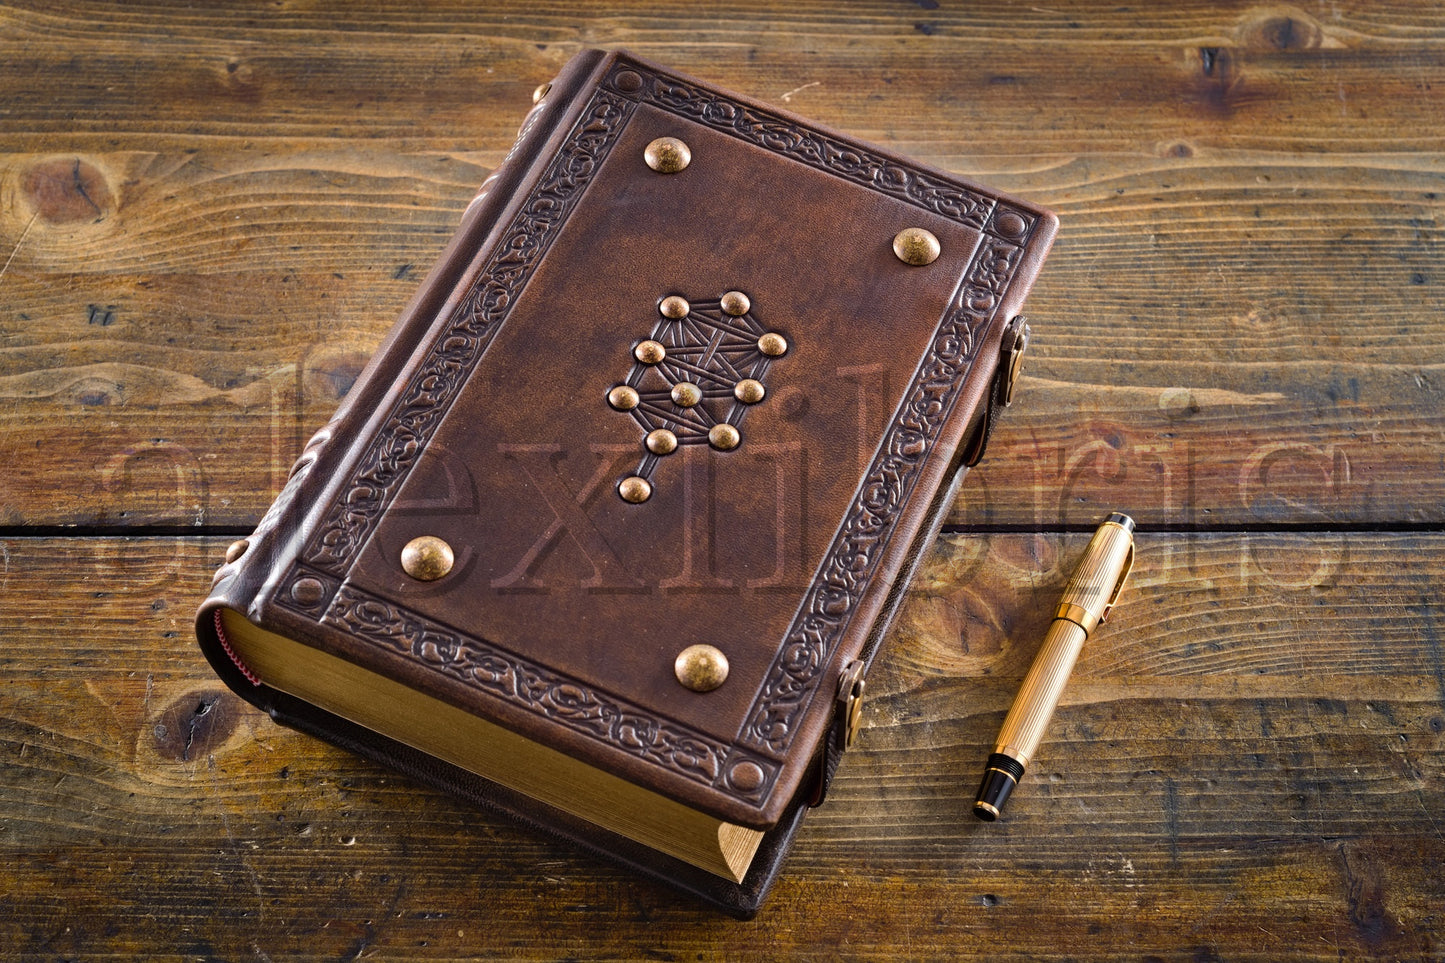 Kabbalah Leather Journal: Large 7.5 x 10 Inches, 600 Blank Pages - Embark on a Spiritual Journey with the Sacred Tree of Life in this Book of Shadows